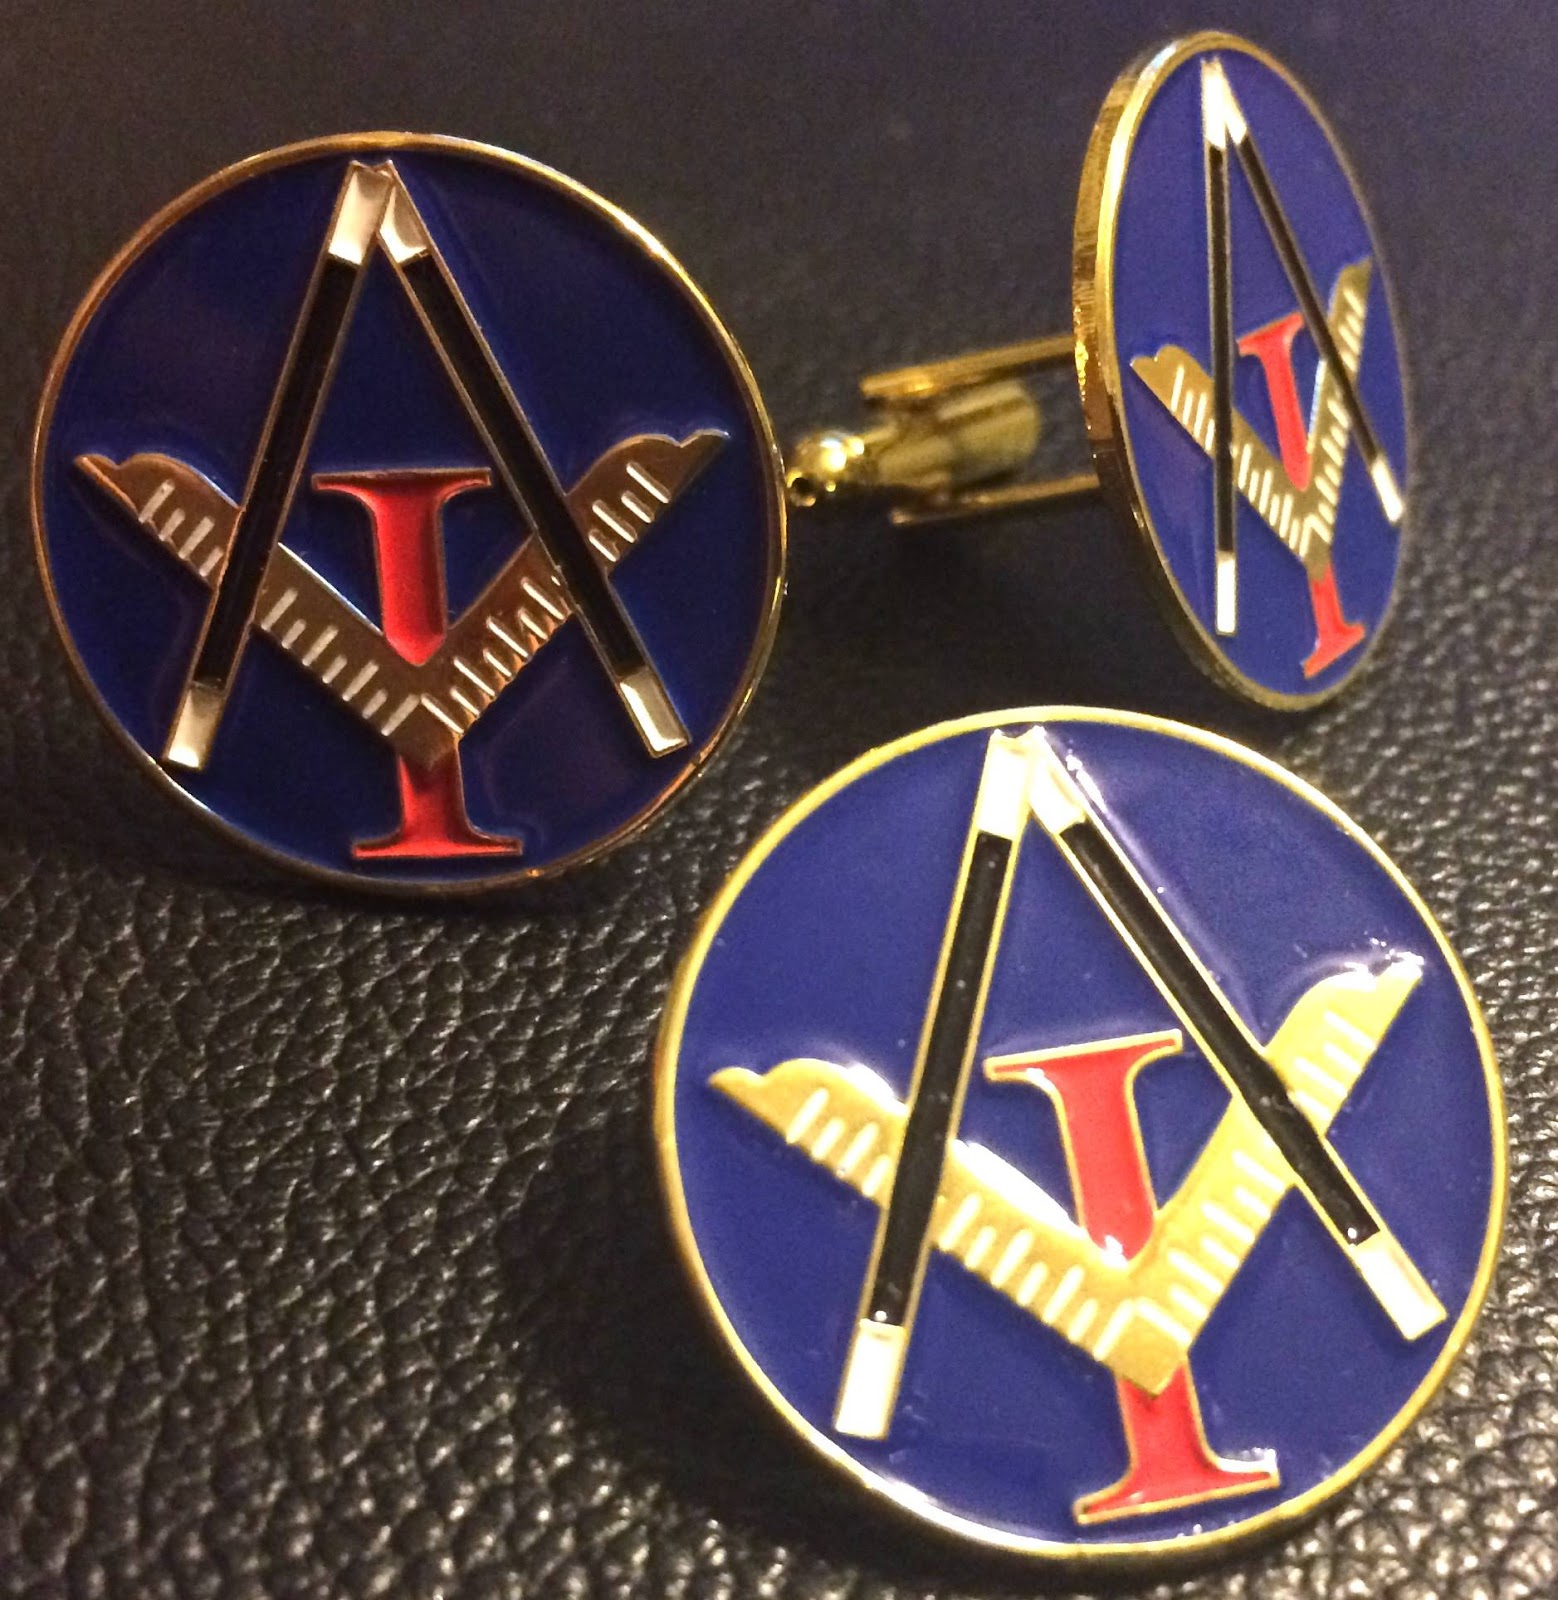 Invisible Lodge Masonic pins depicting the Square and Compasses and magic wands